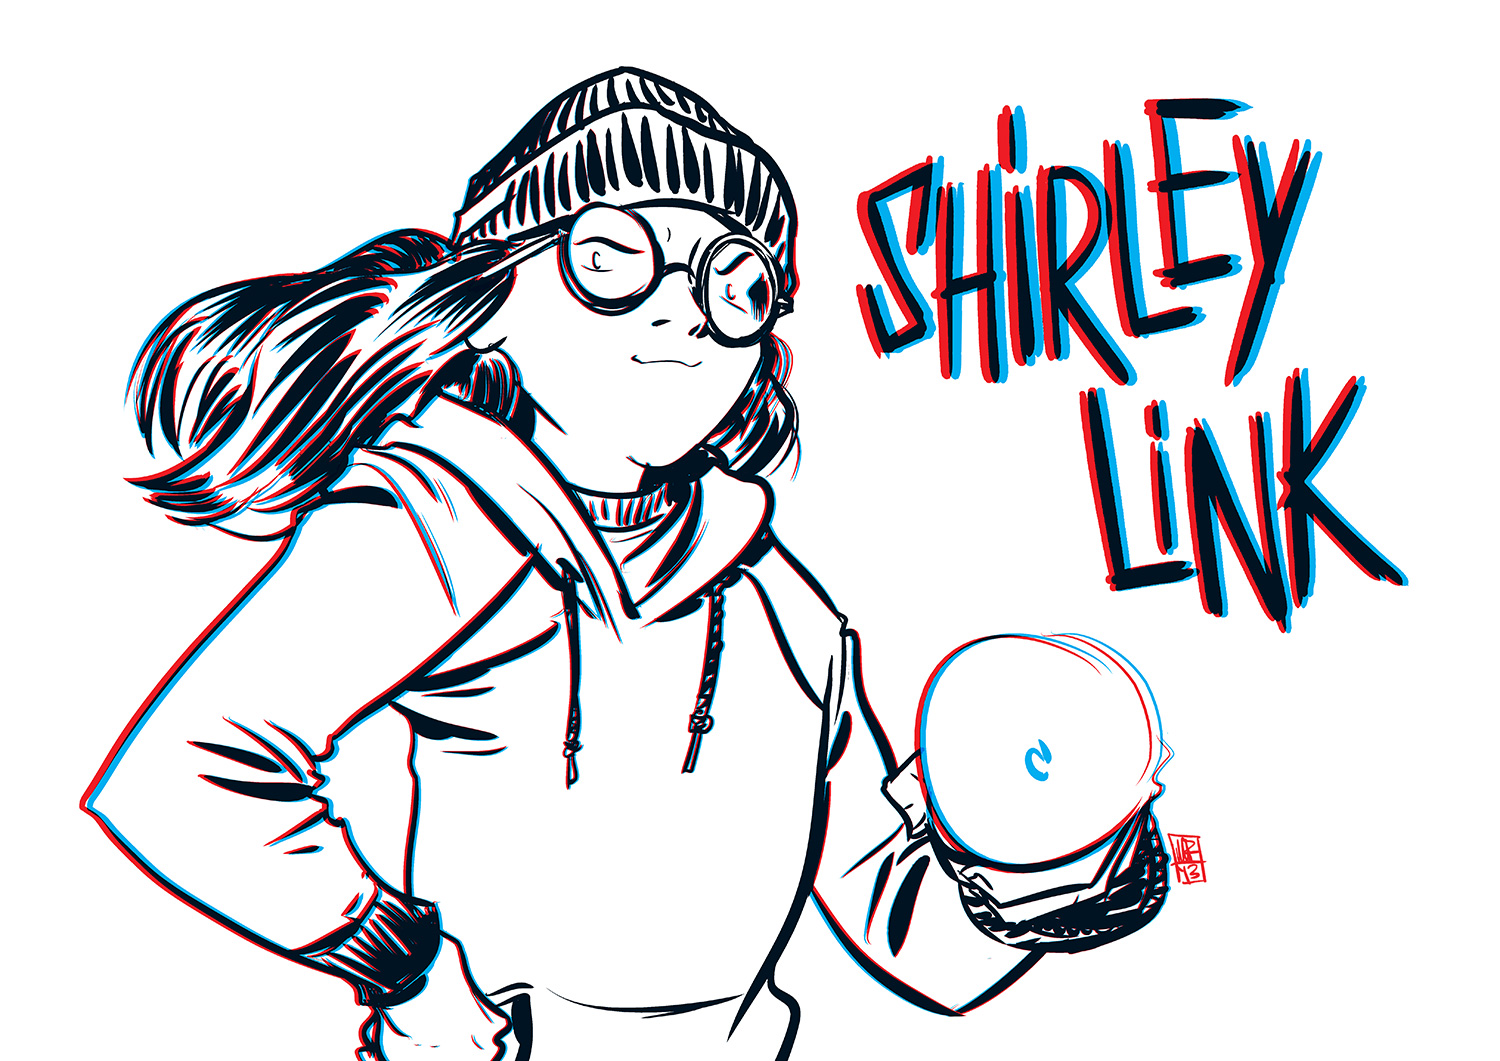 Shirley Link & The Ghost of Christmas Presents